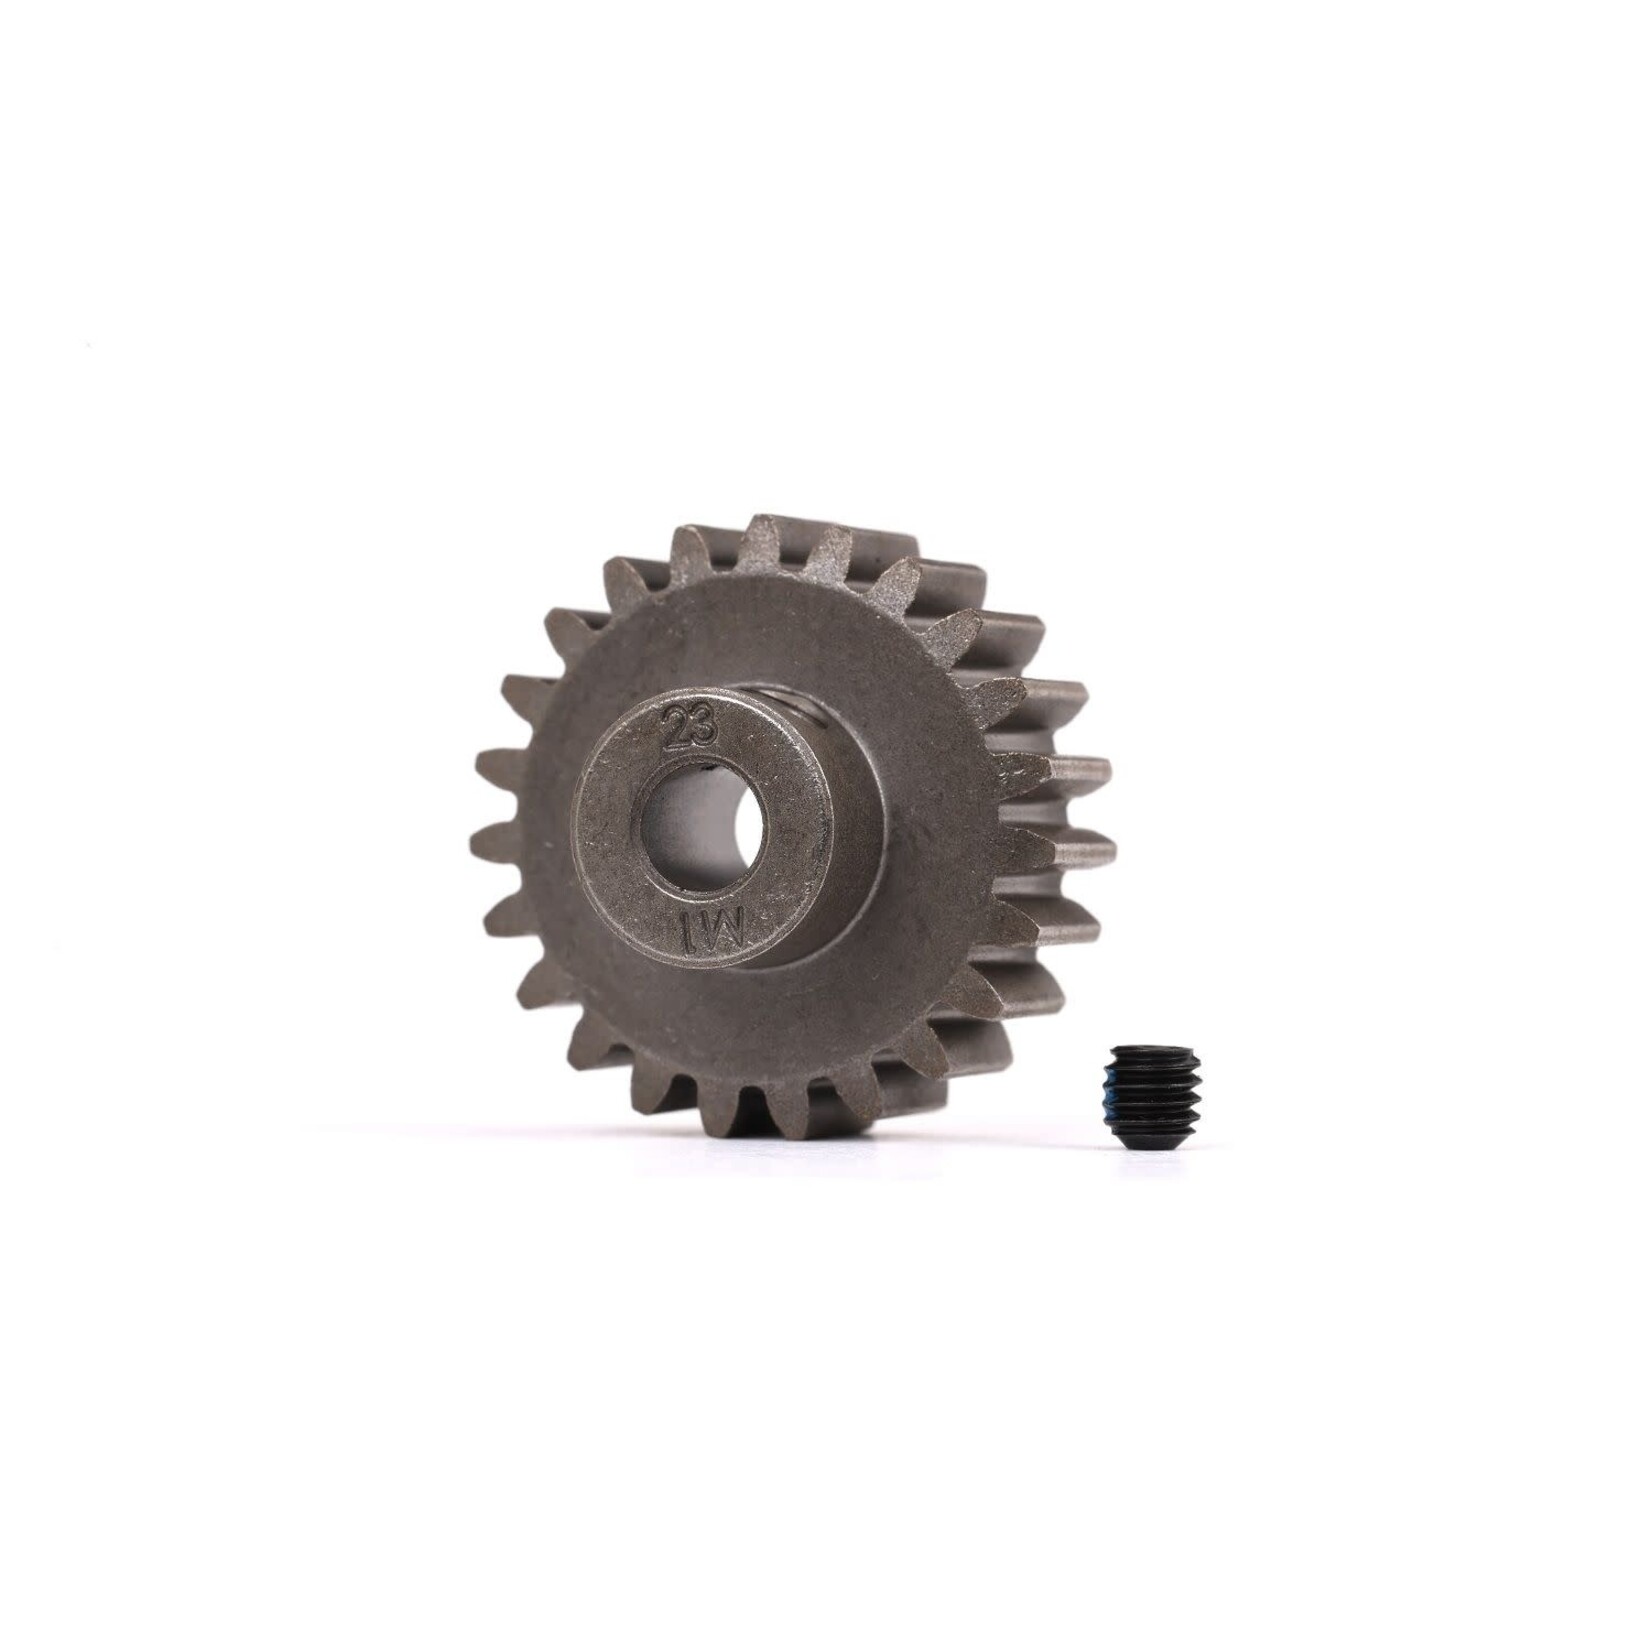 Traxxas 6481X Gear, 23-T pinion (1.0 metric pitch) (fits 5mm shaft)/ set screw (for use only with steel spur gears)